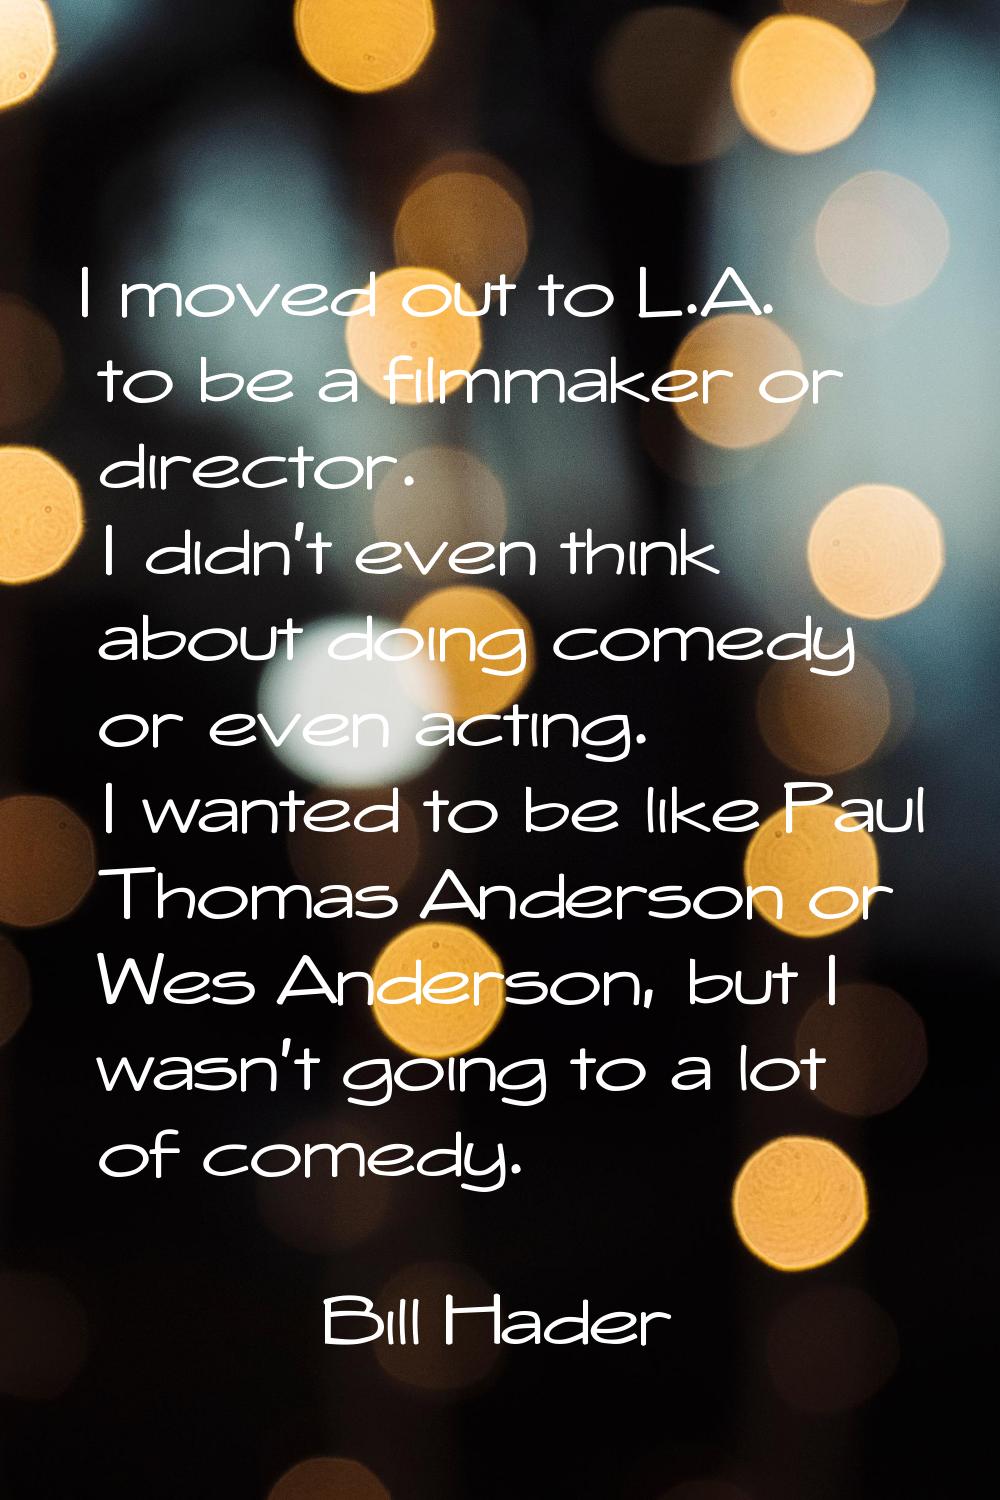 I moved out to L.A. to be a filmmaker or director. I didn't even think about doing comedy or even a